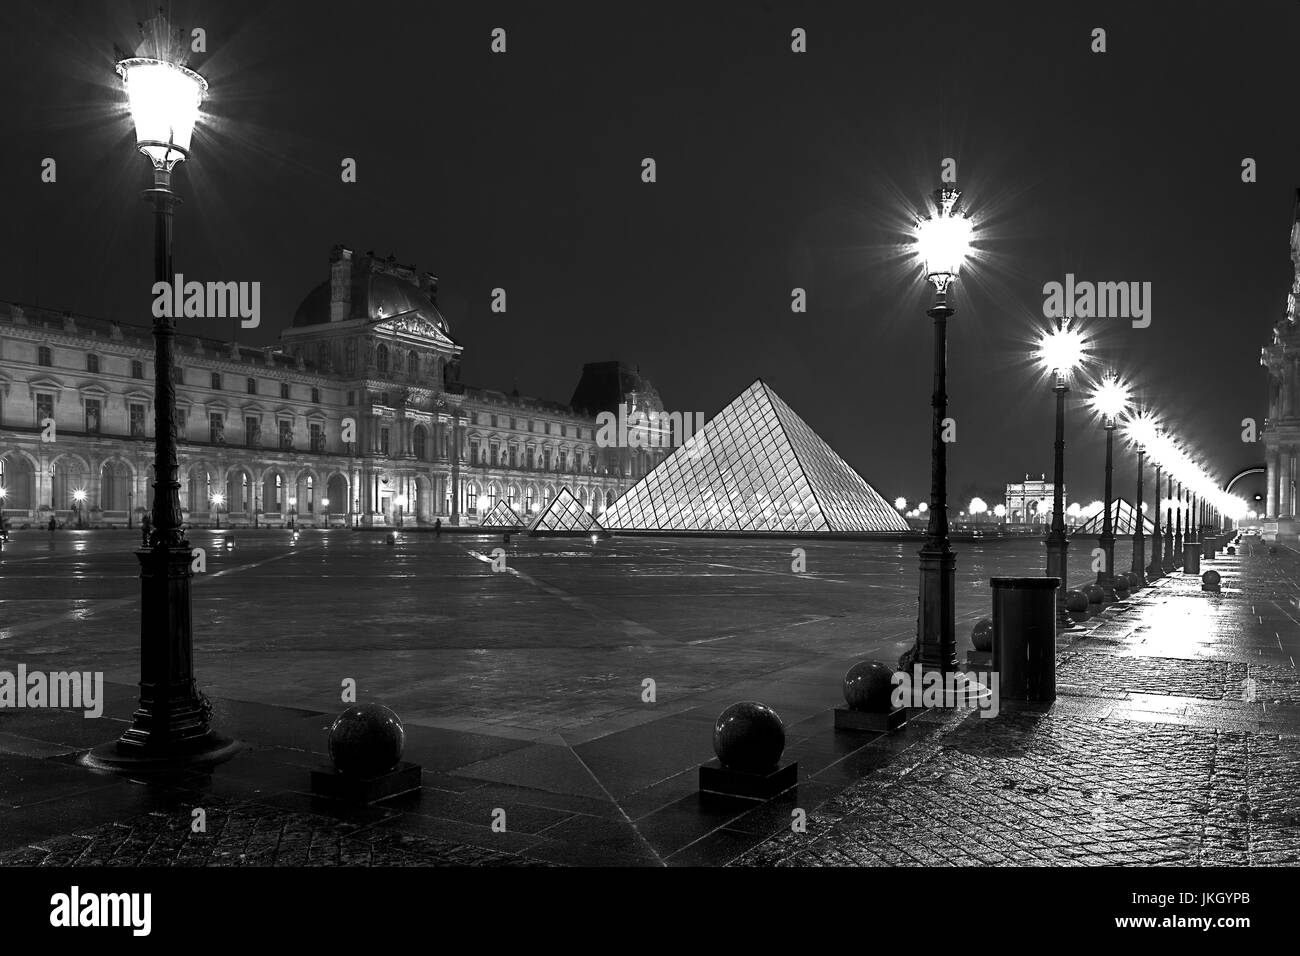 View of the Louvre Museum and the Pyramid, Paris, France Stock Photo